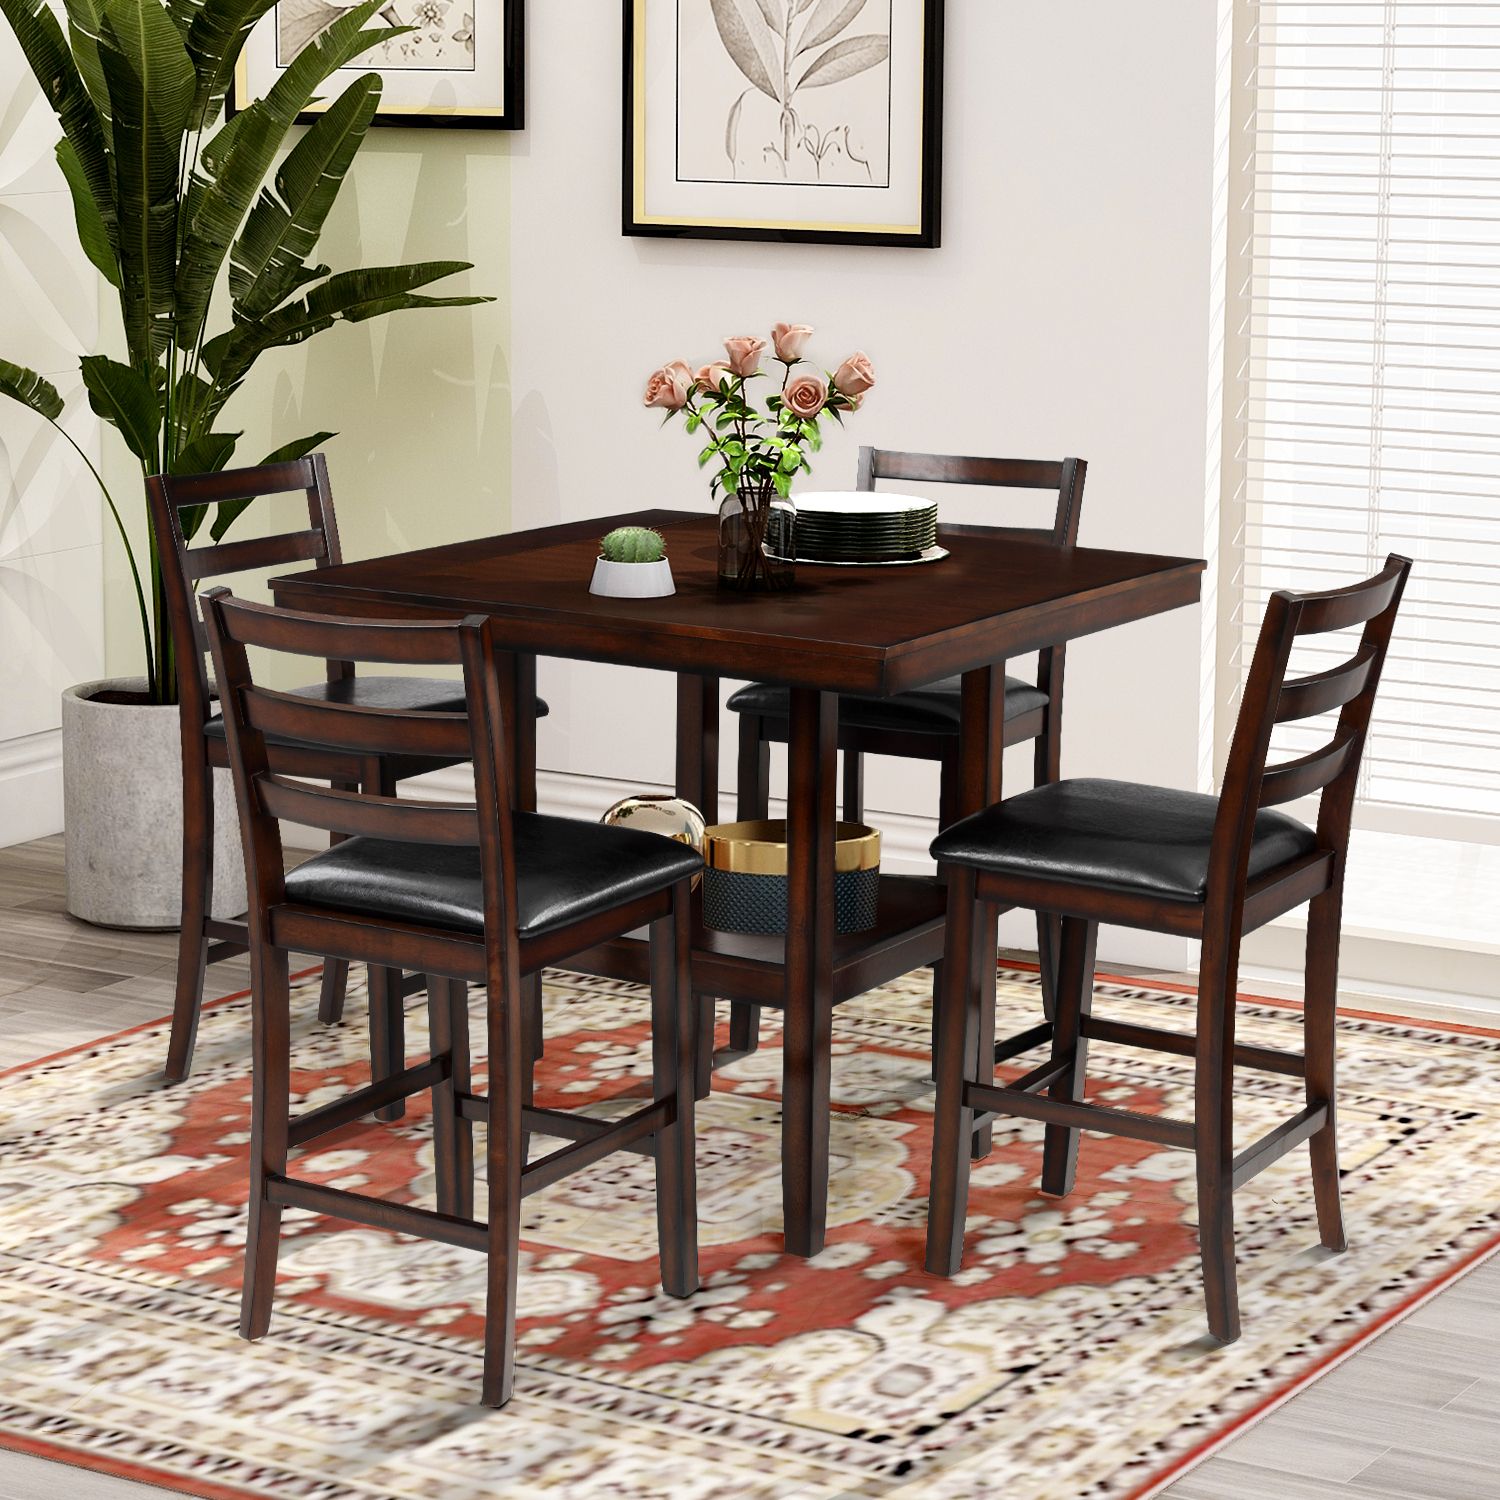 Wood Bistro Table And Chairs Sets Intended For Most Up To Date Euroco 5 Piece Counter Height Dining Set, Wooden Dining Set With Padded (View 3 of 15)